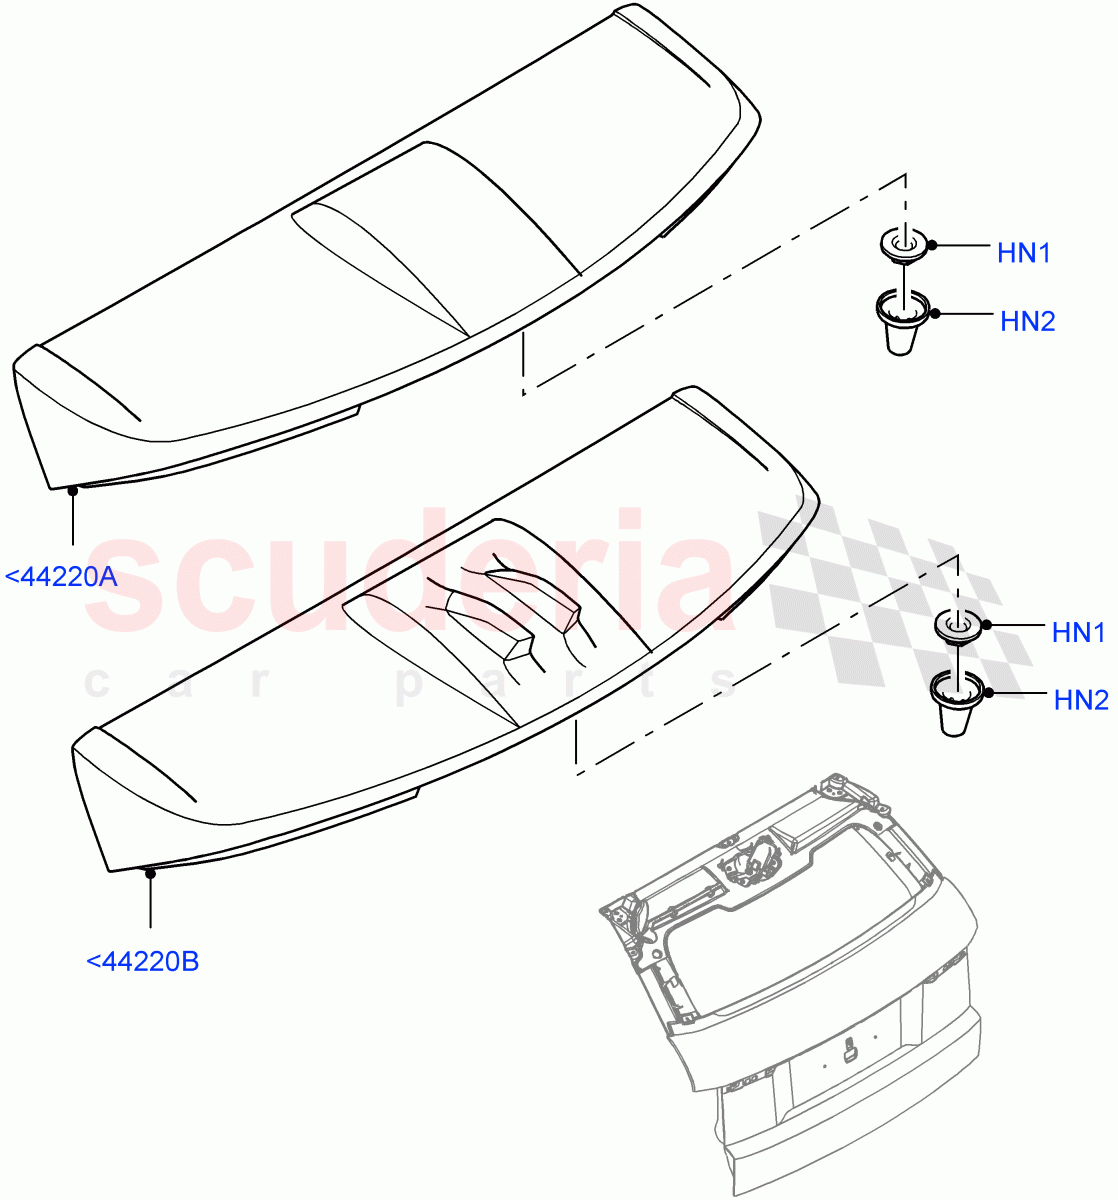 Spoiler And Related Parts(5 Door,Halewood (UK),3 Door)((V)FROMHH000001,(V)TOHH999999) of Land Rover Land Rover Range Rover Evoque (2012-2018) [2.2 Single Turbo Diesel]